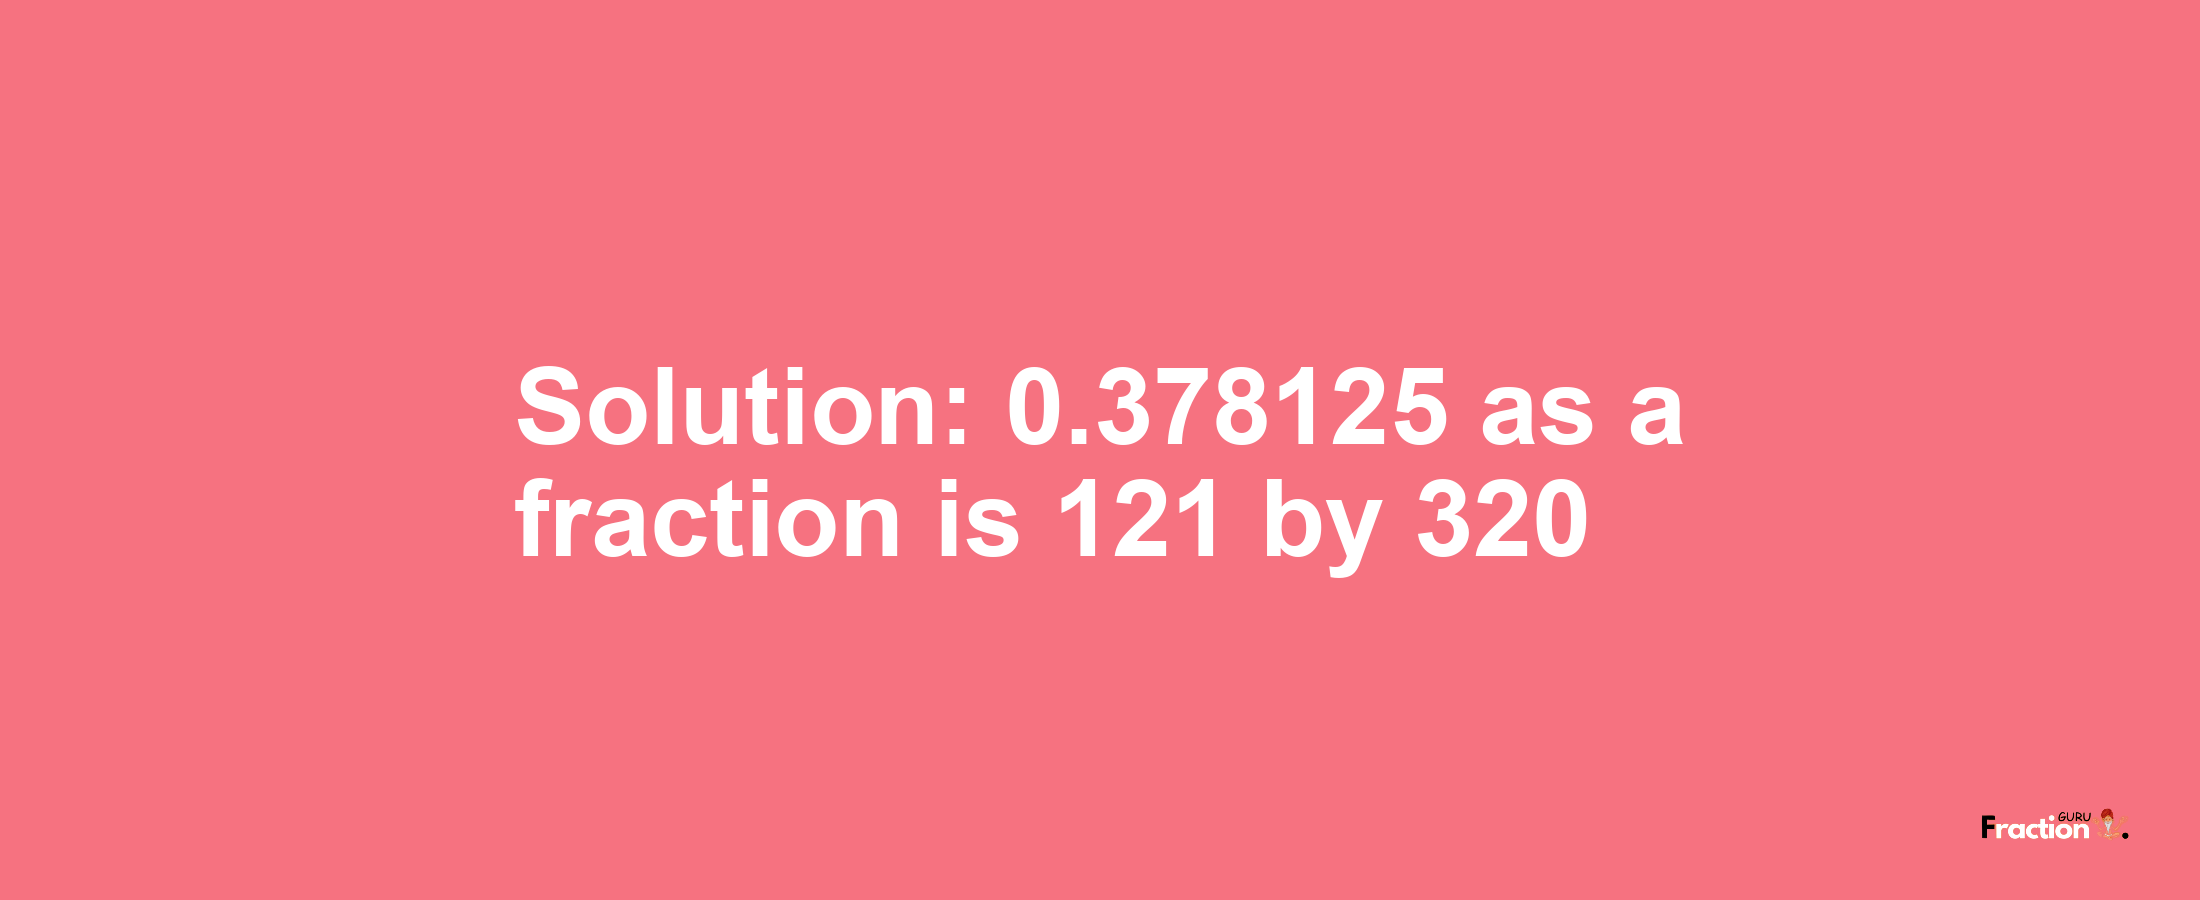 Solution:0.378125 as a fraction is 121/320